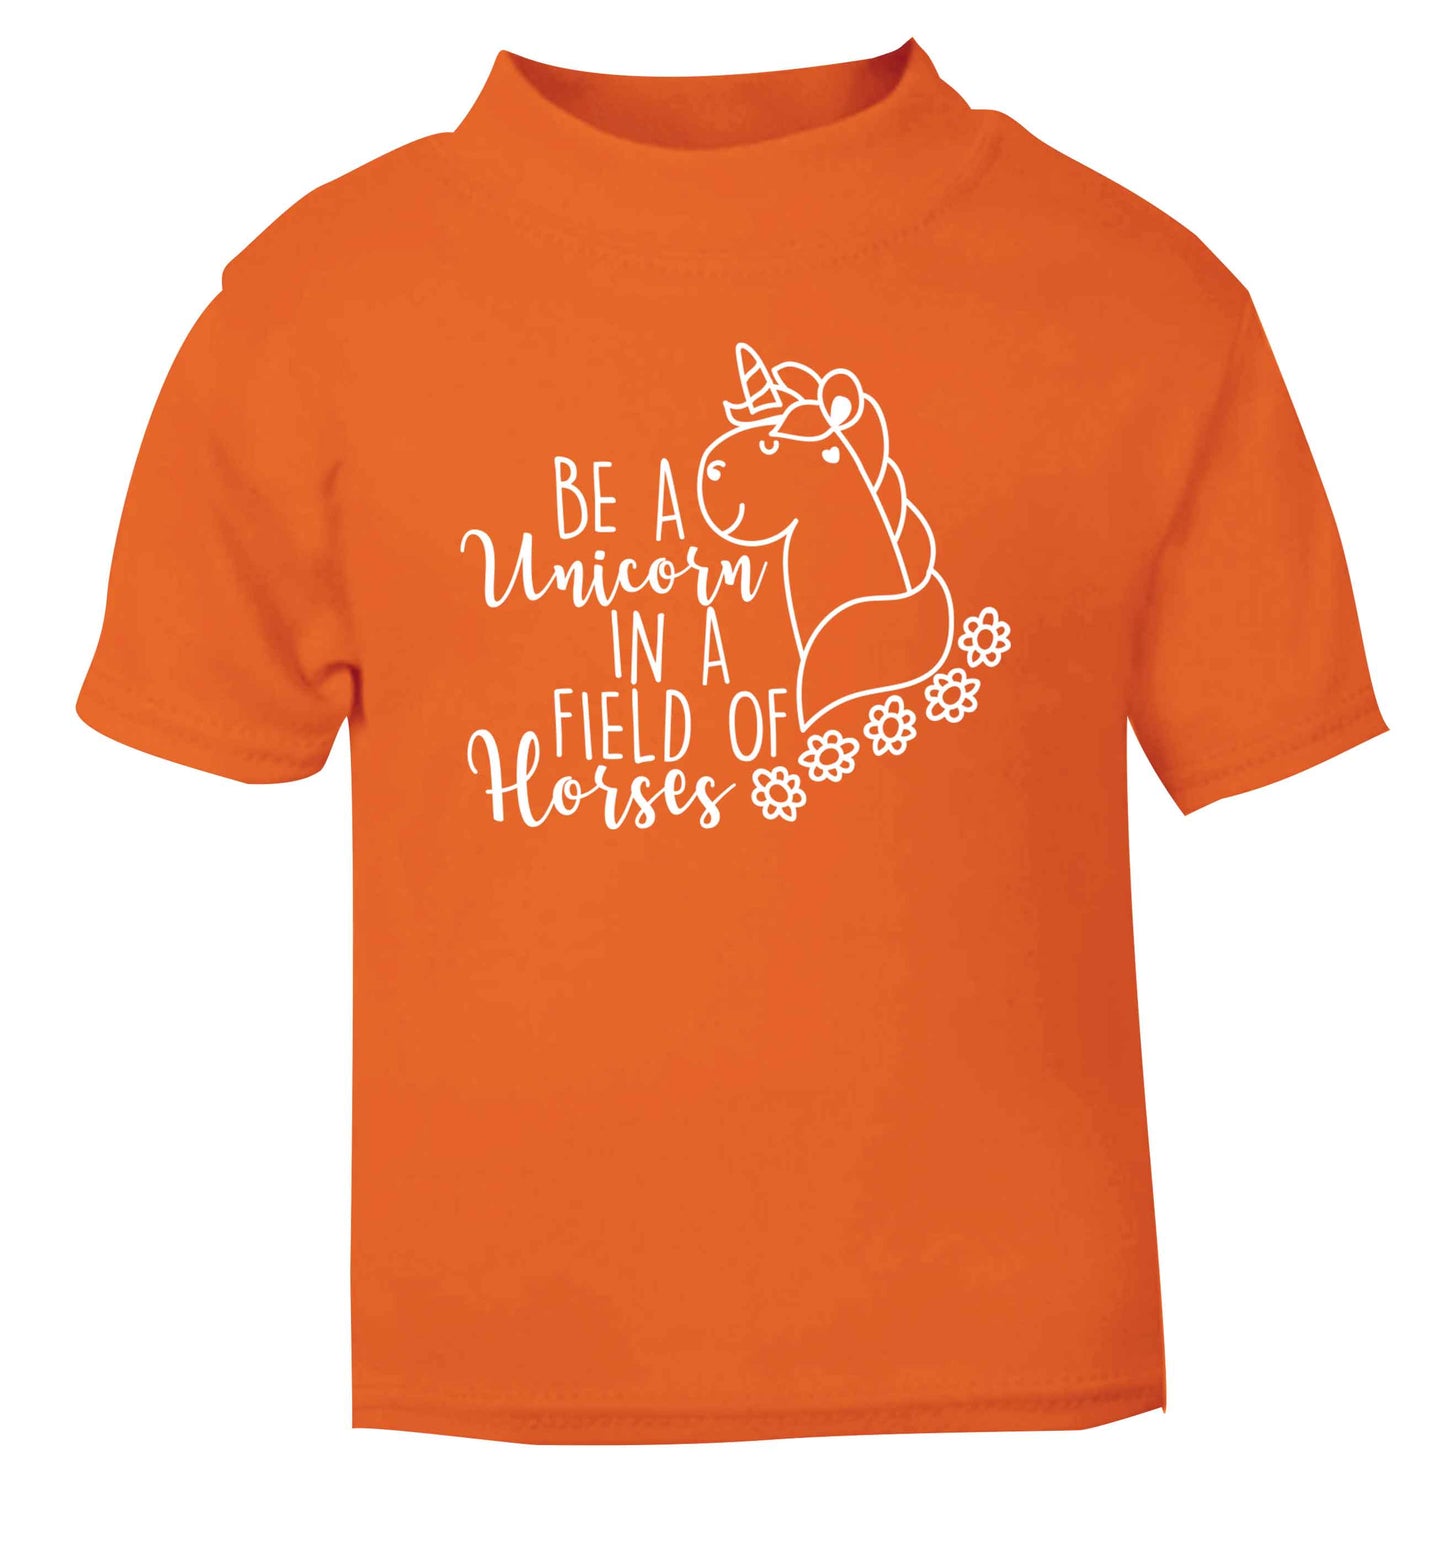 Be a unicorn in a field of horses orange Baby Toddler Tshirt 2 Years